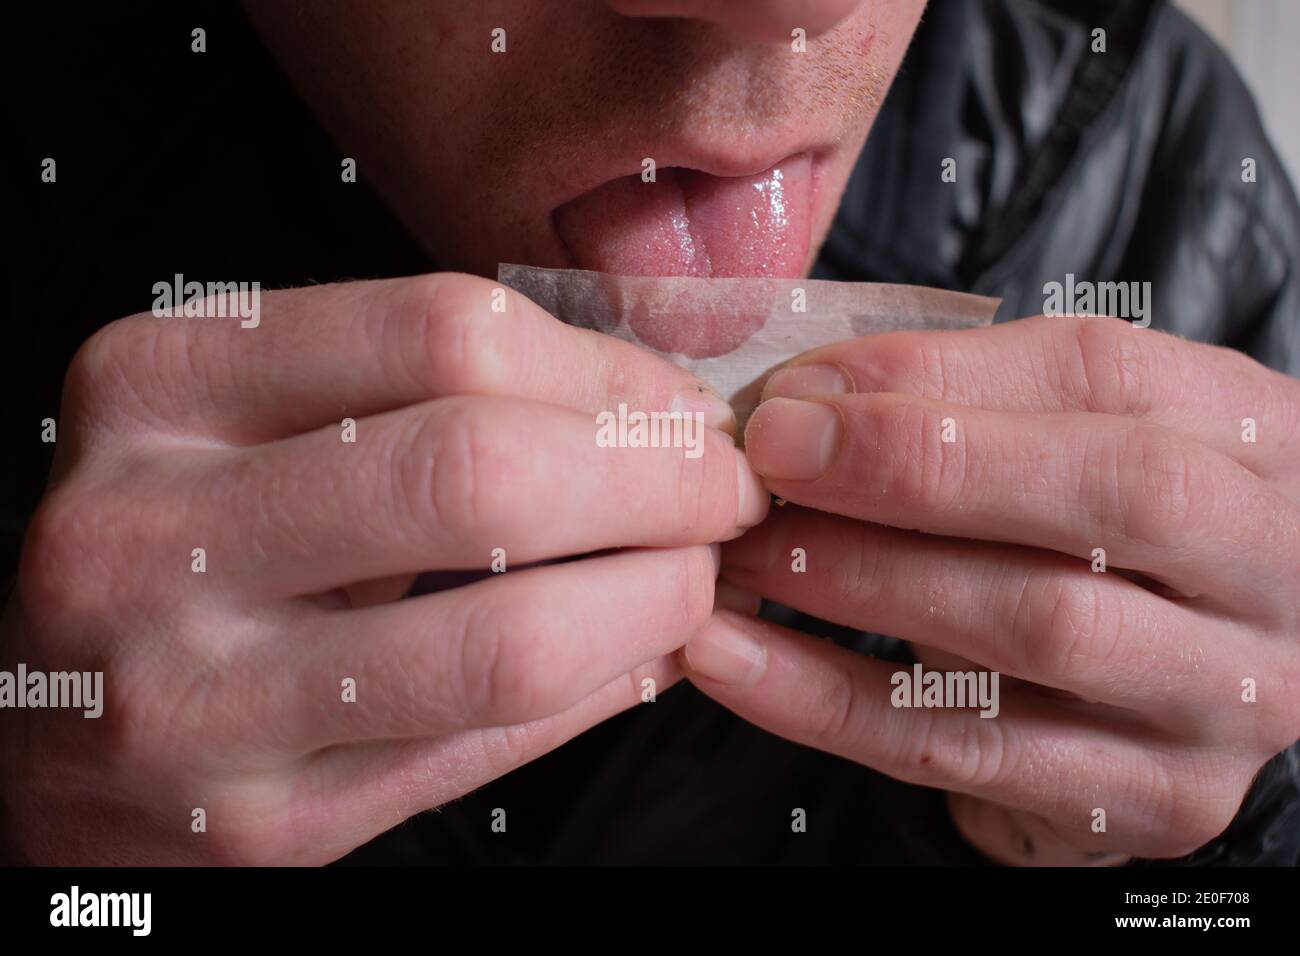 Male licks rolling papers while making a cigarette joint Stock Photo